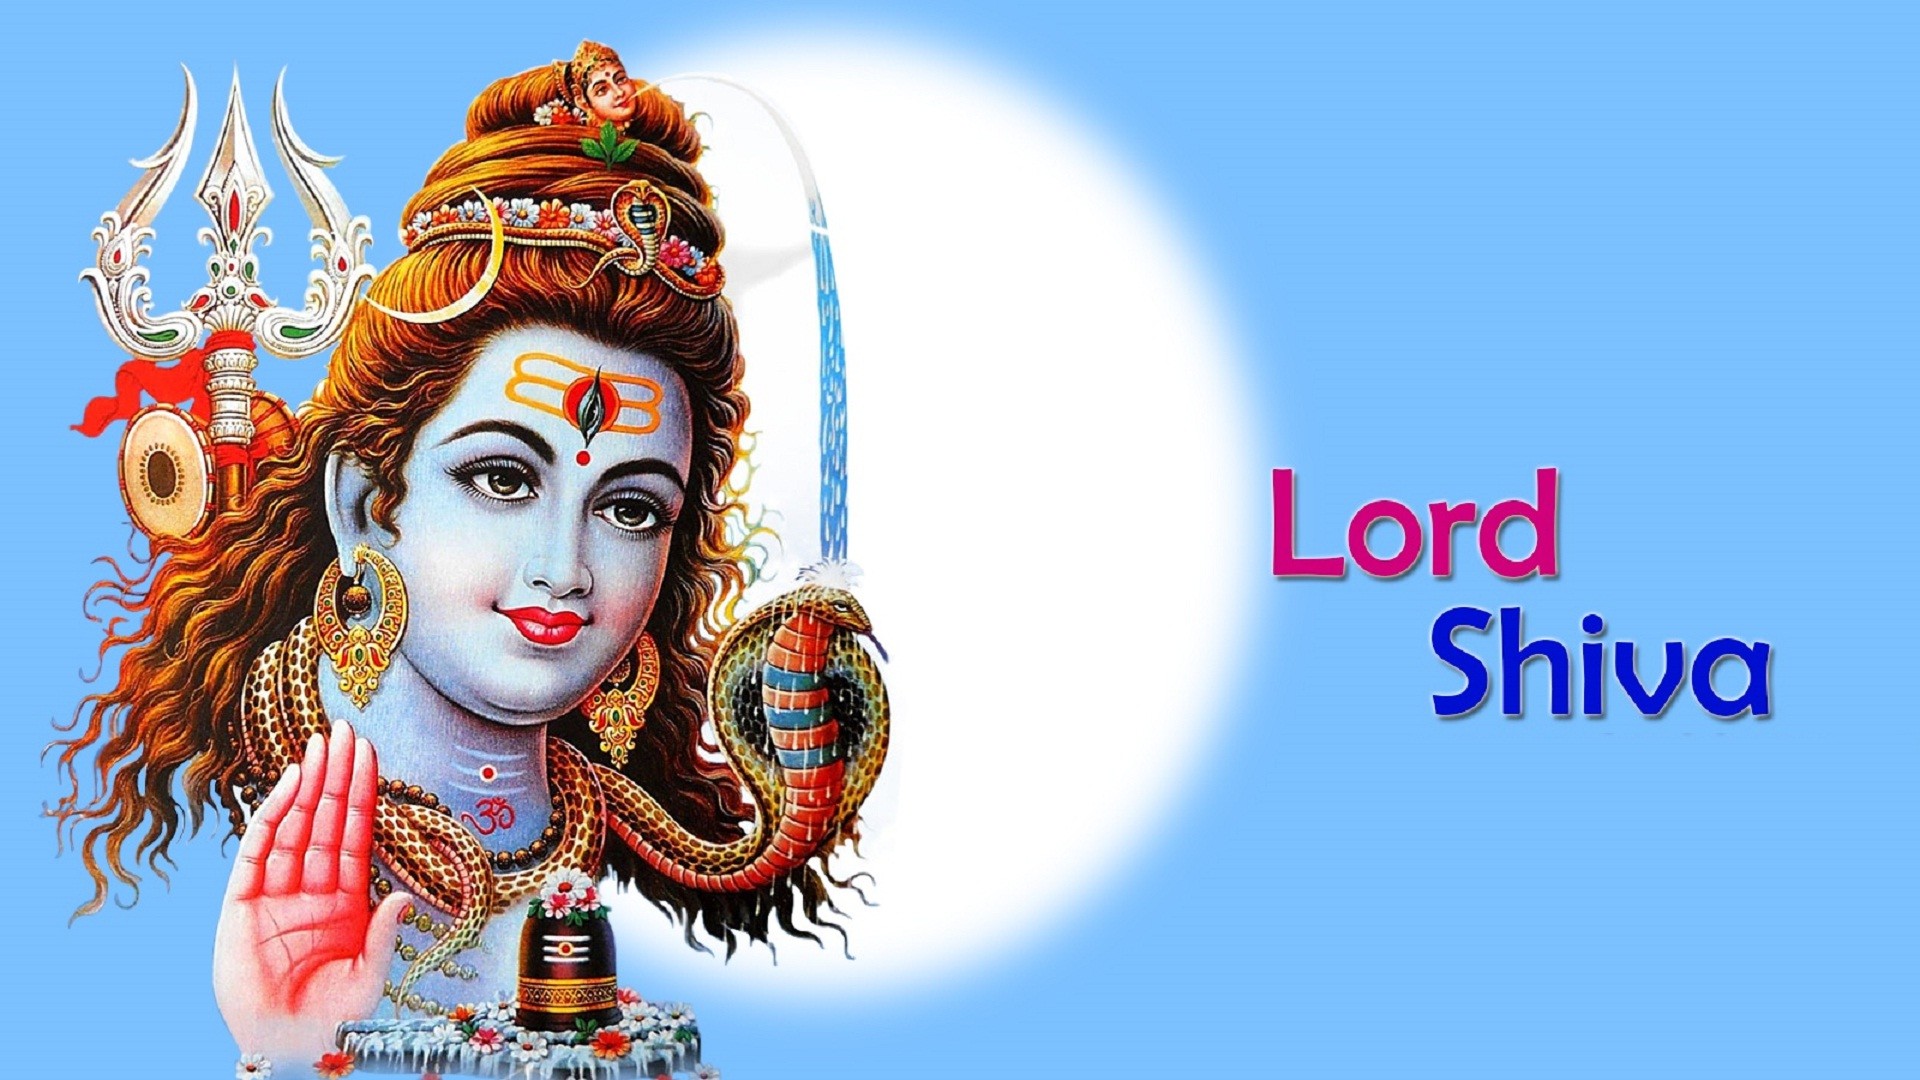 1920x1080 Lord shiva images download hd